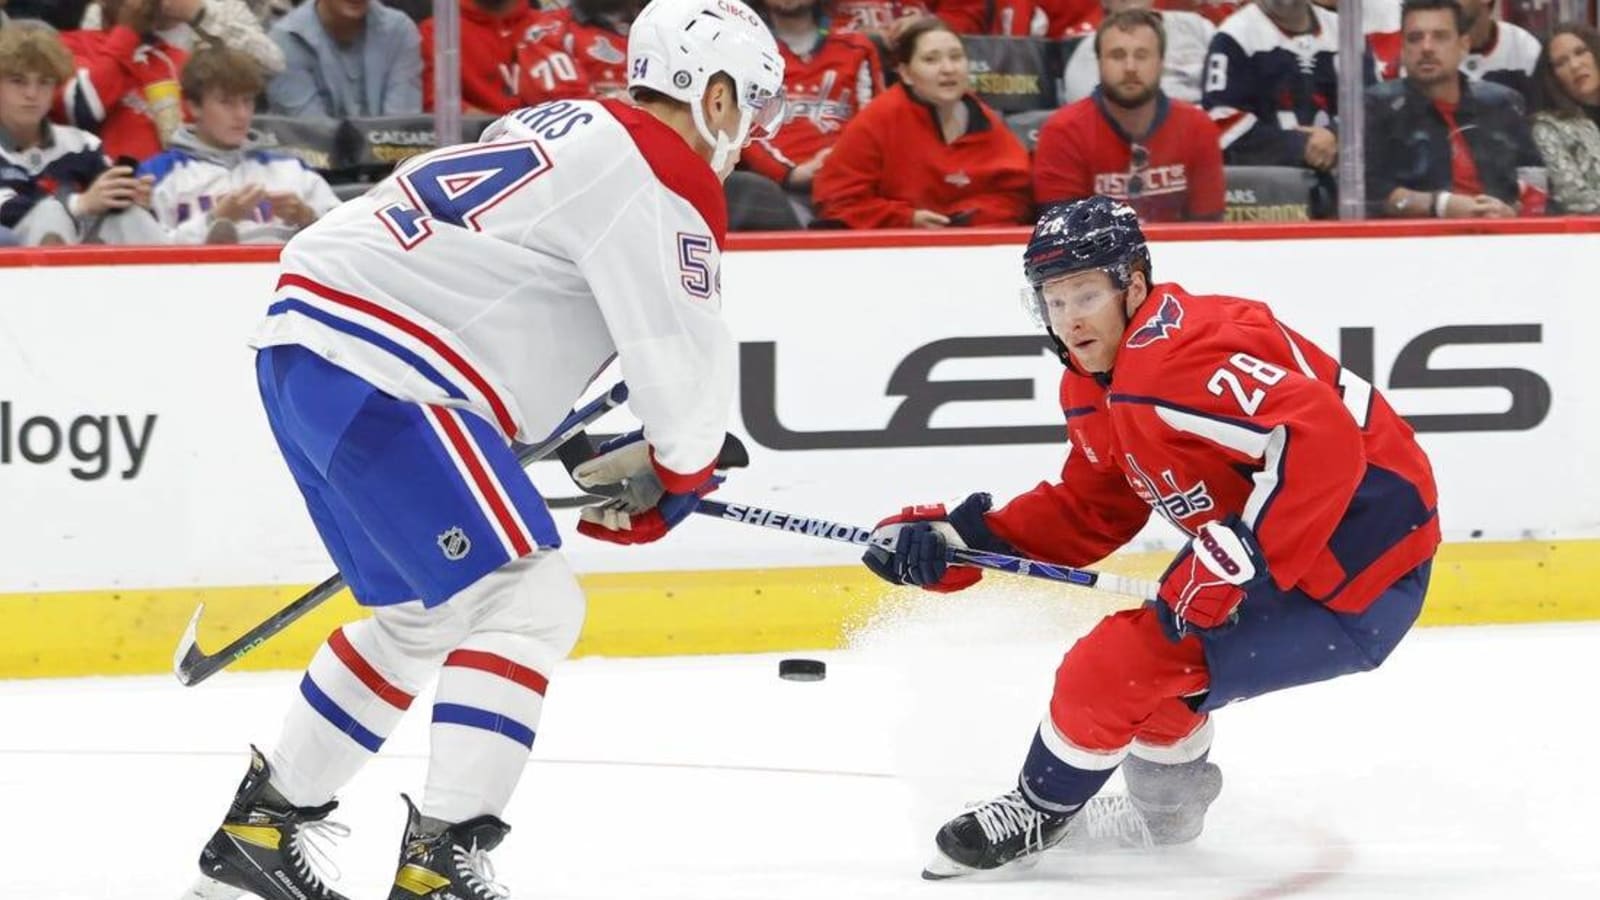 Capitals, Kings both look to shake off rough losses